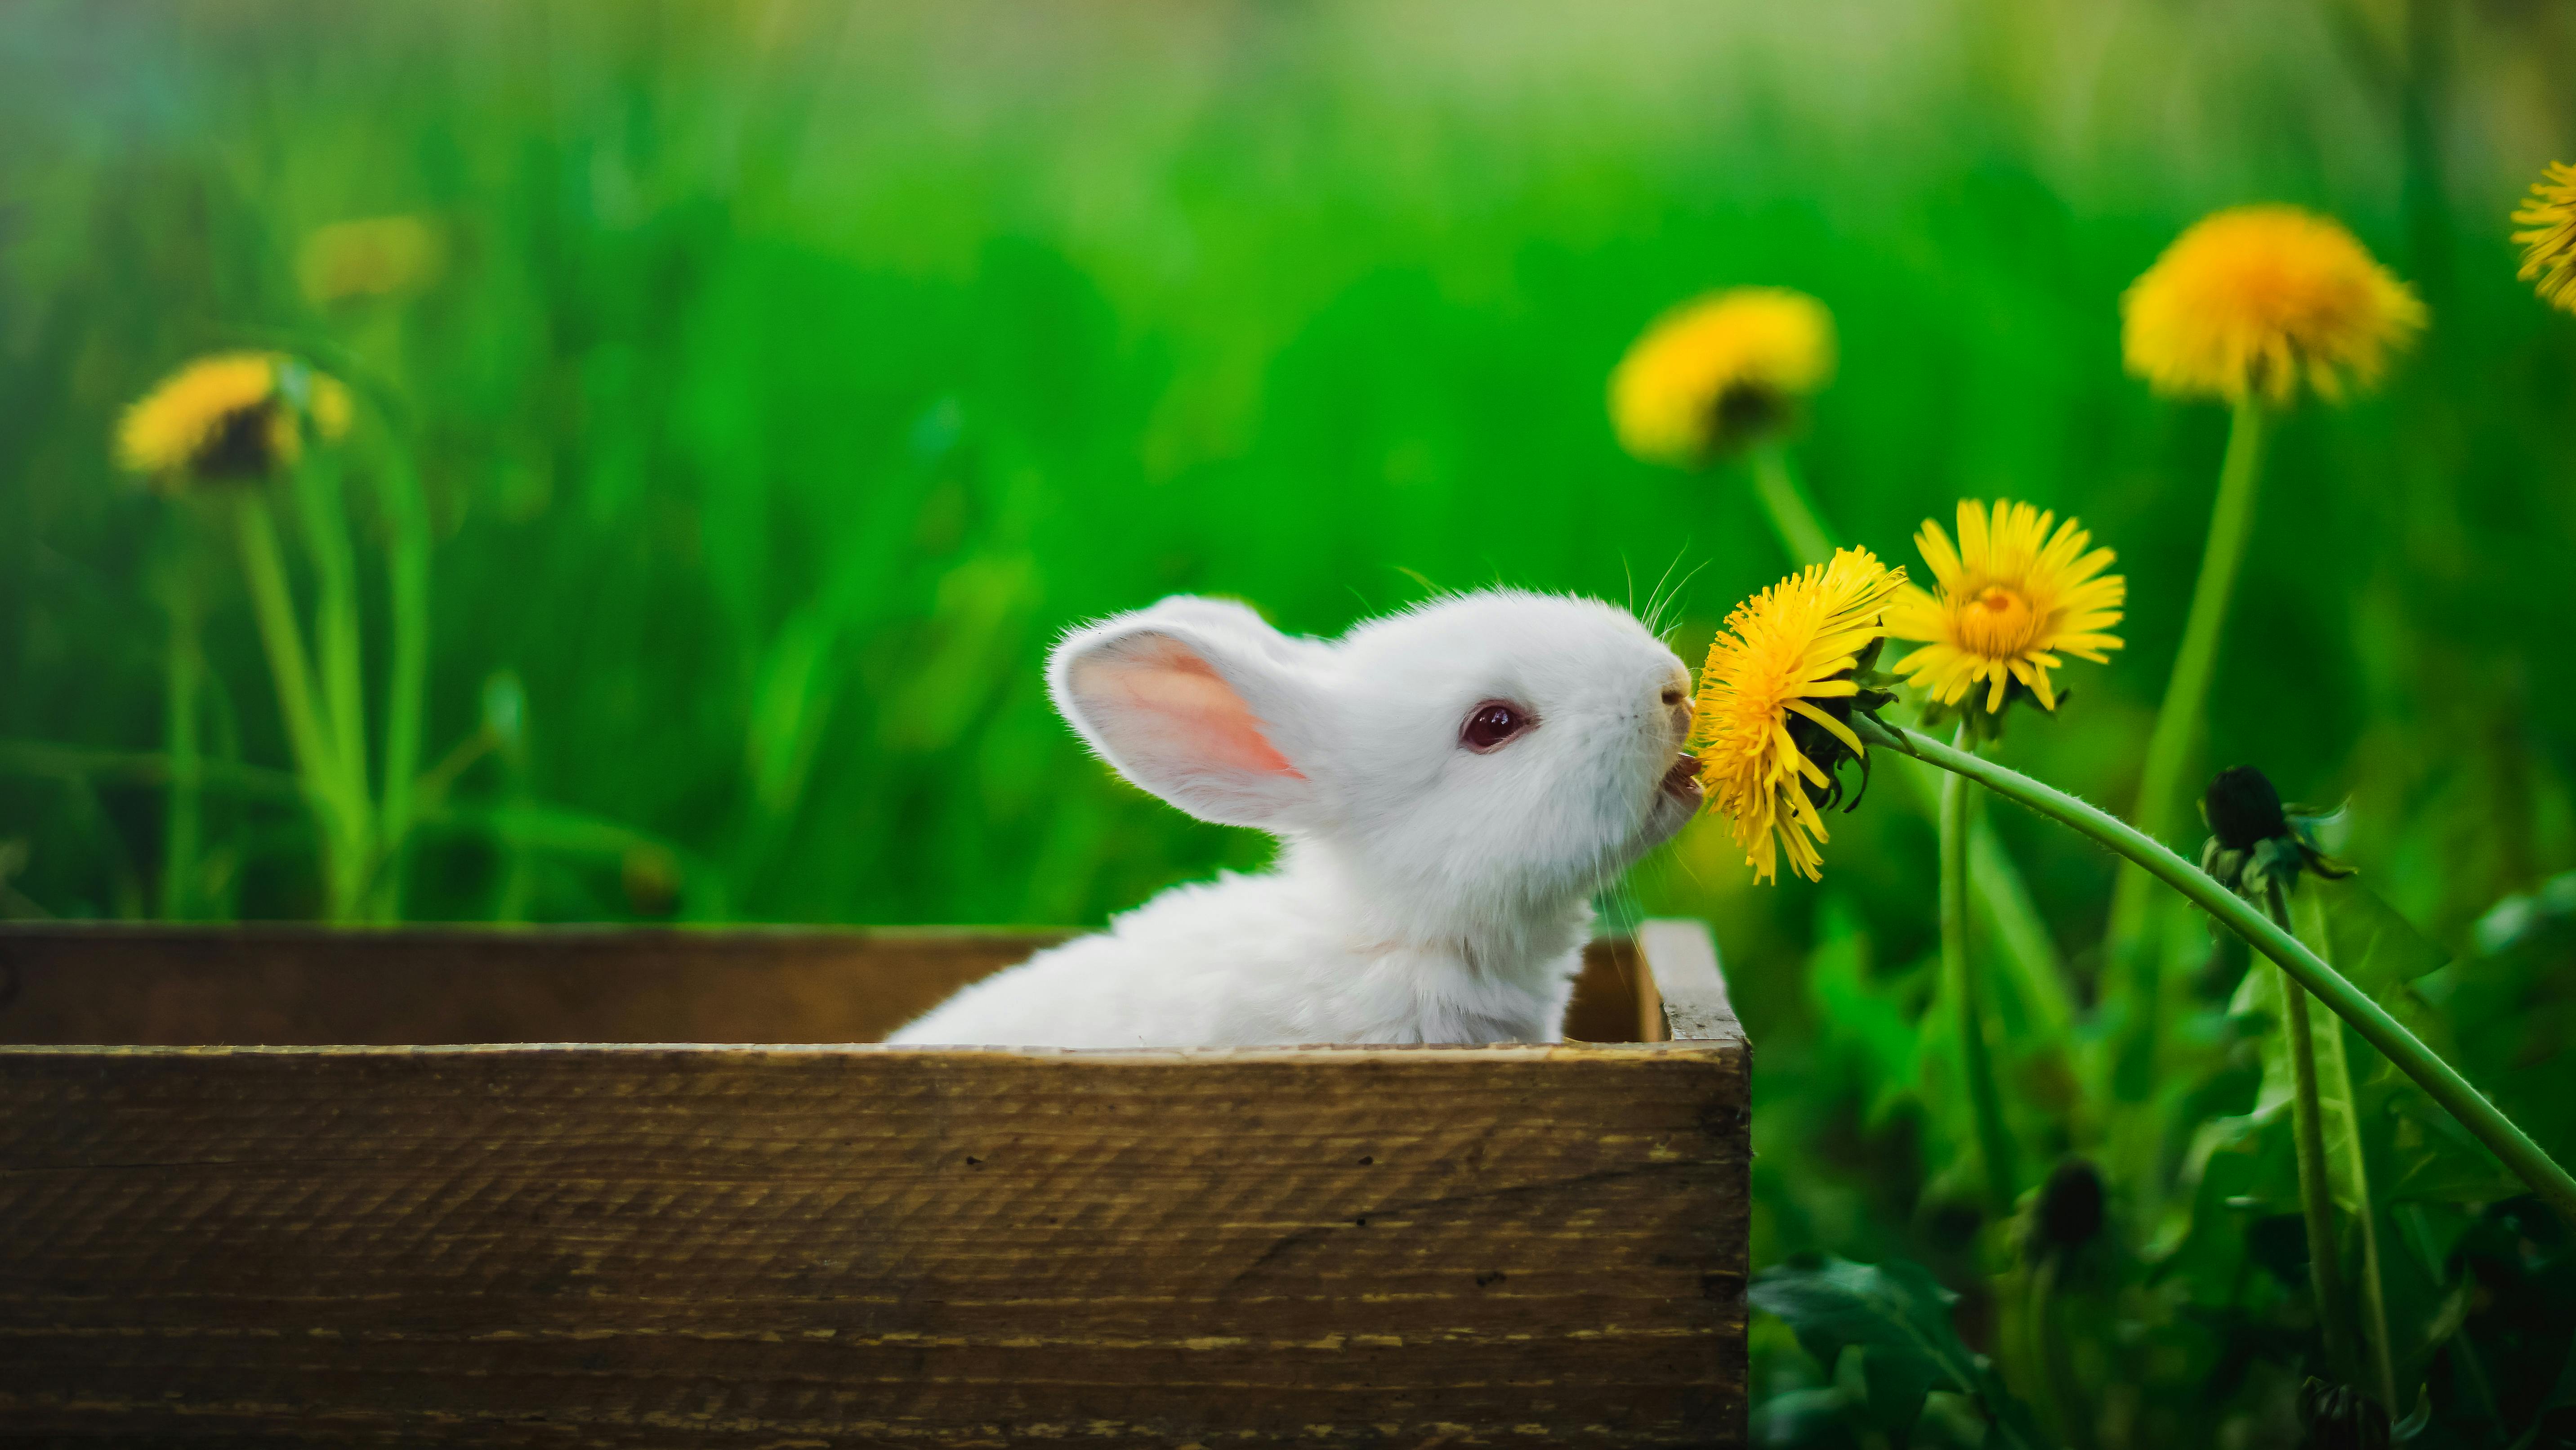 A white rabbit sitting inside a brown wooden box. | Photo: Pexels